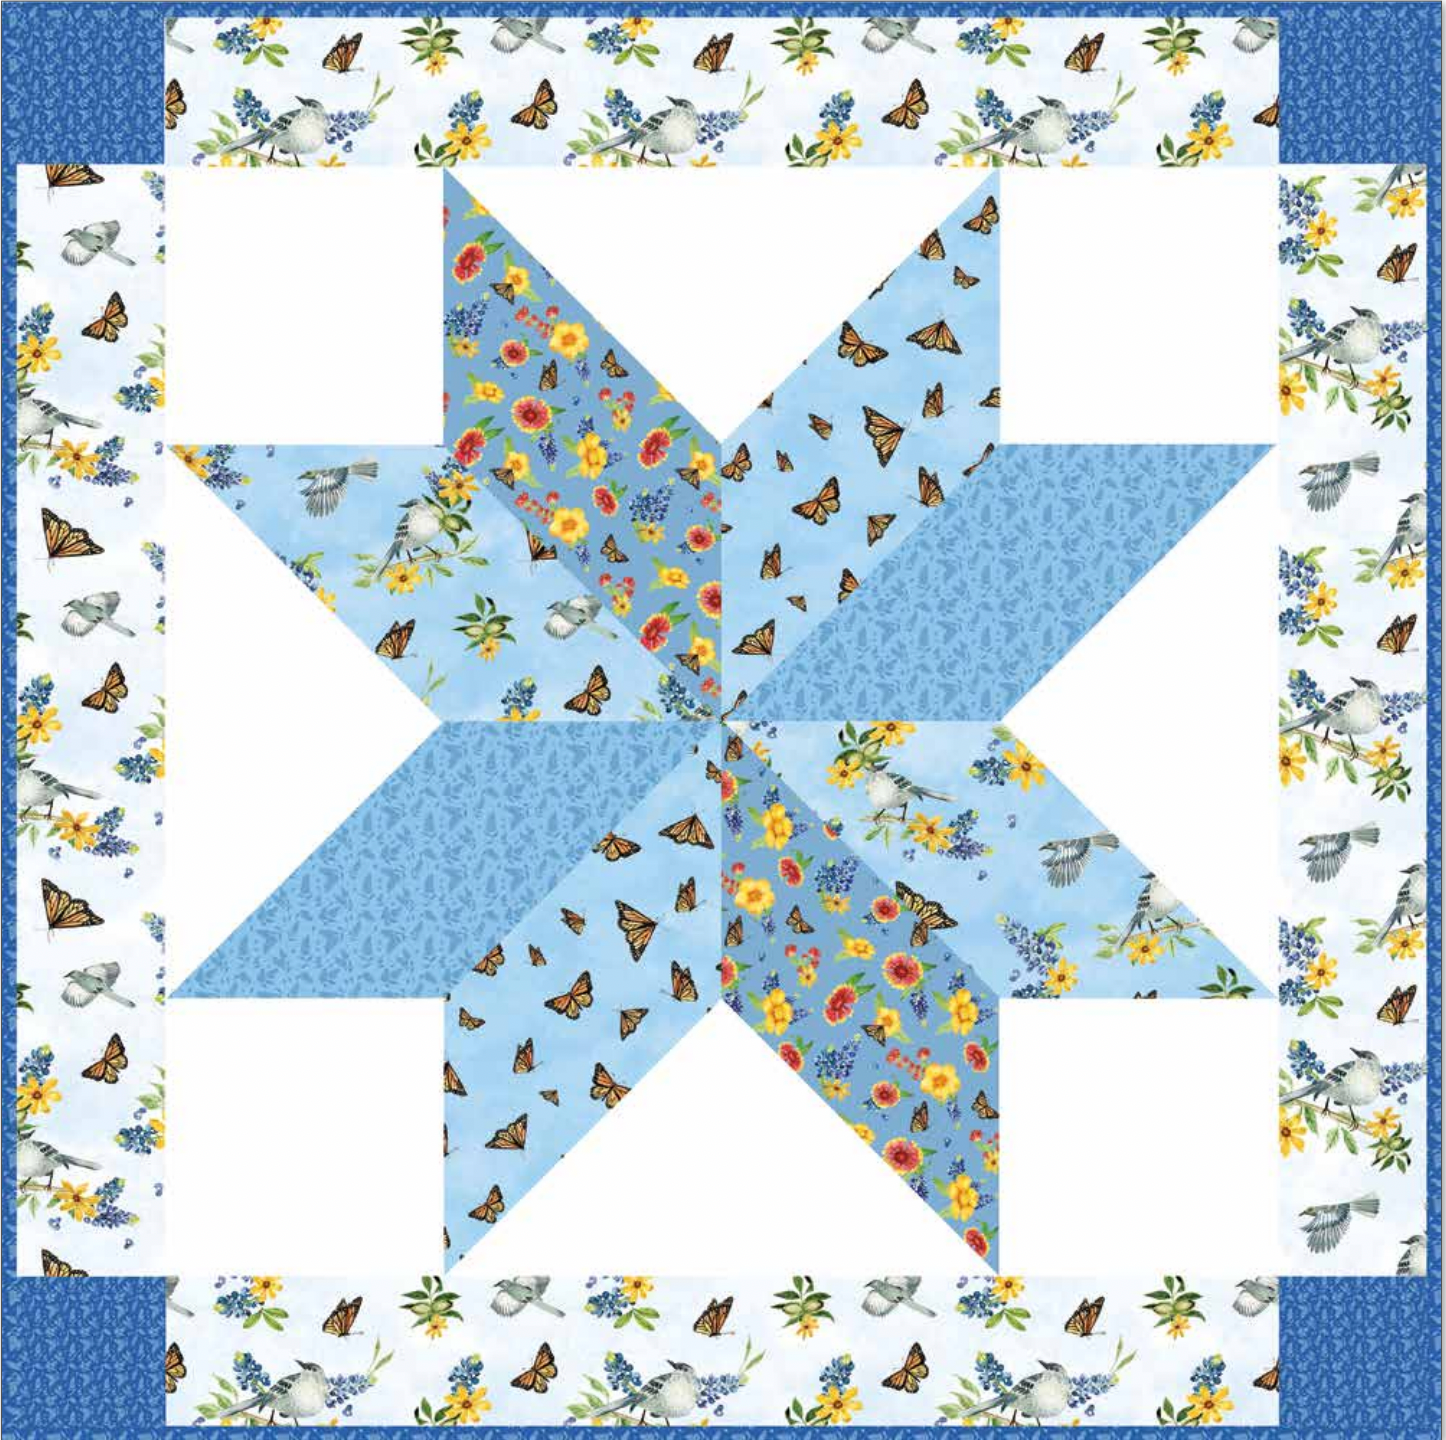 *NEW* Light Breeze Quilt - Fabric Kit with optional template & pattern